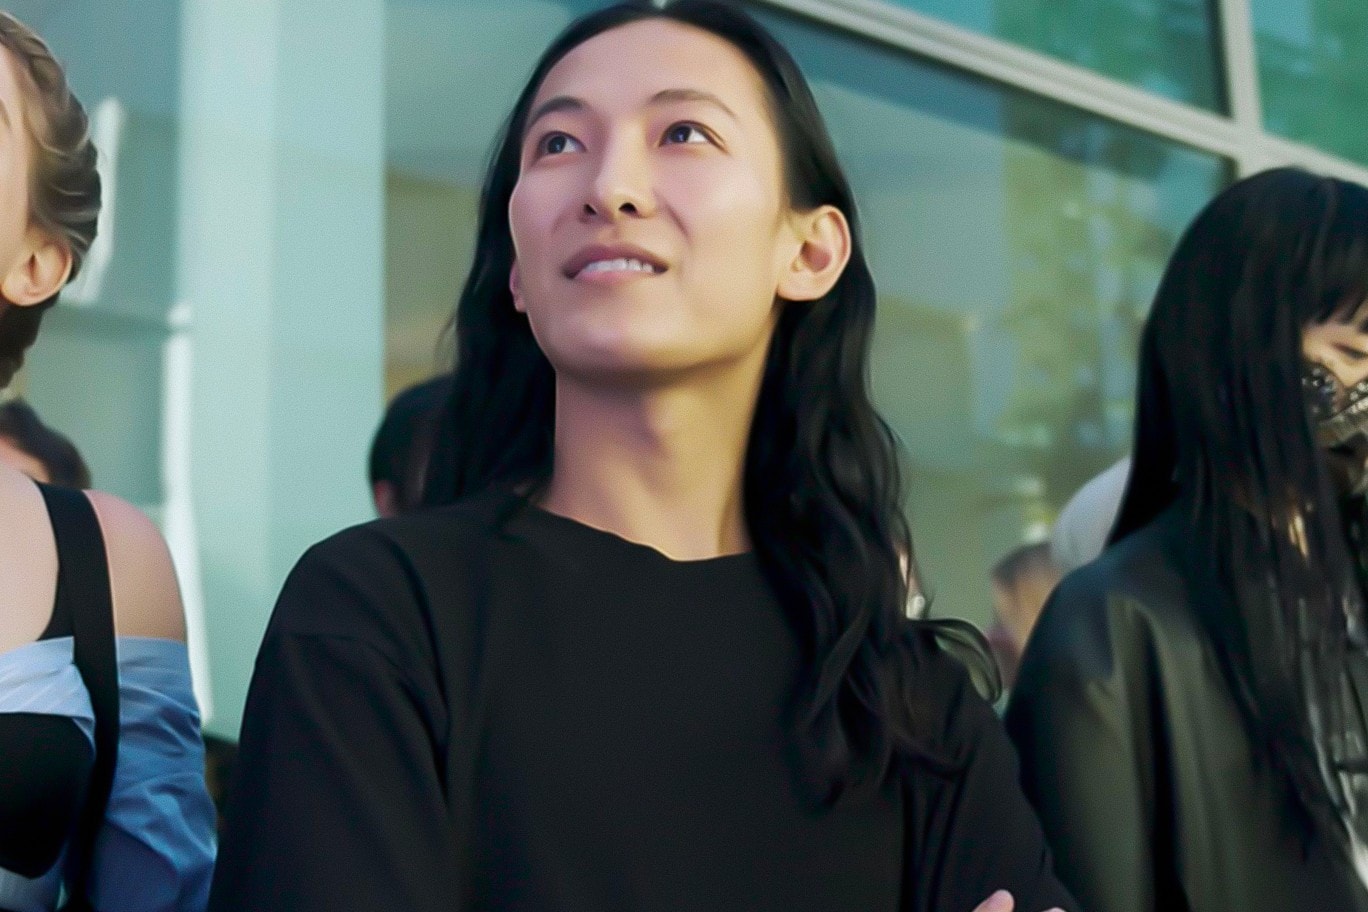 alexander wang sexual misconduct accusations allegations response instagram i will do better info